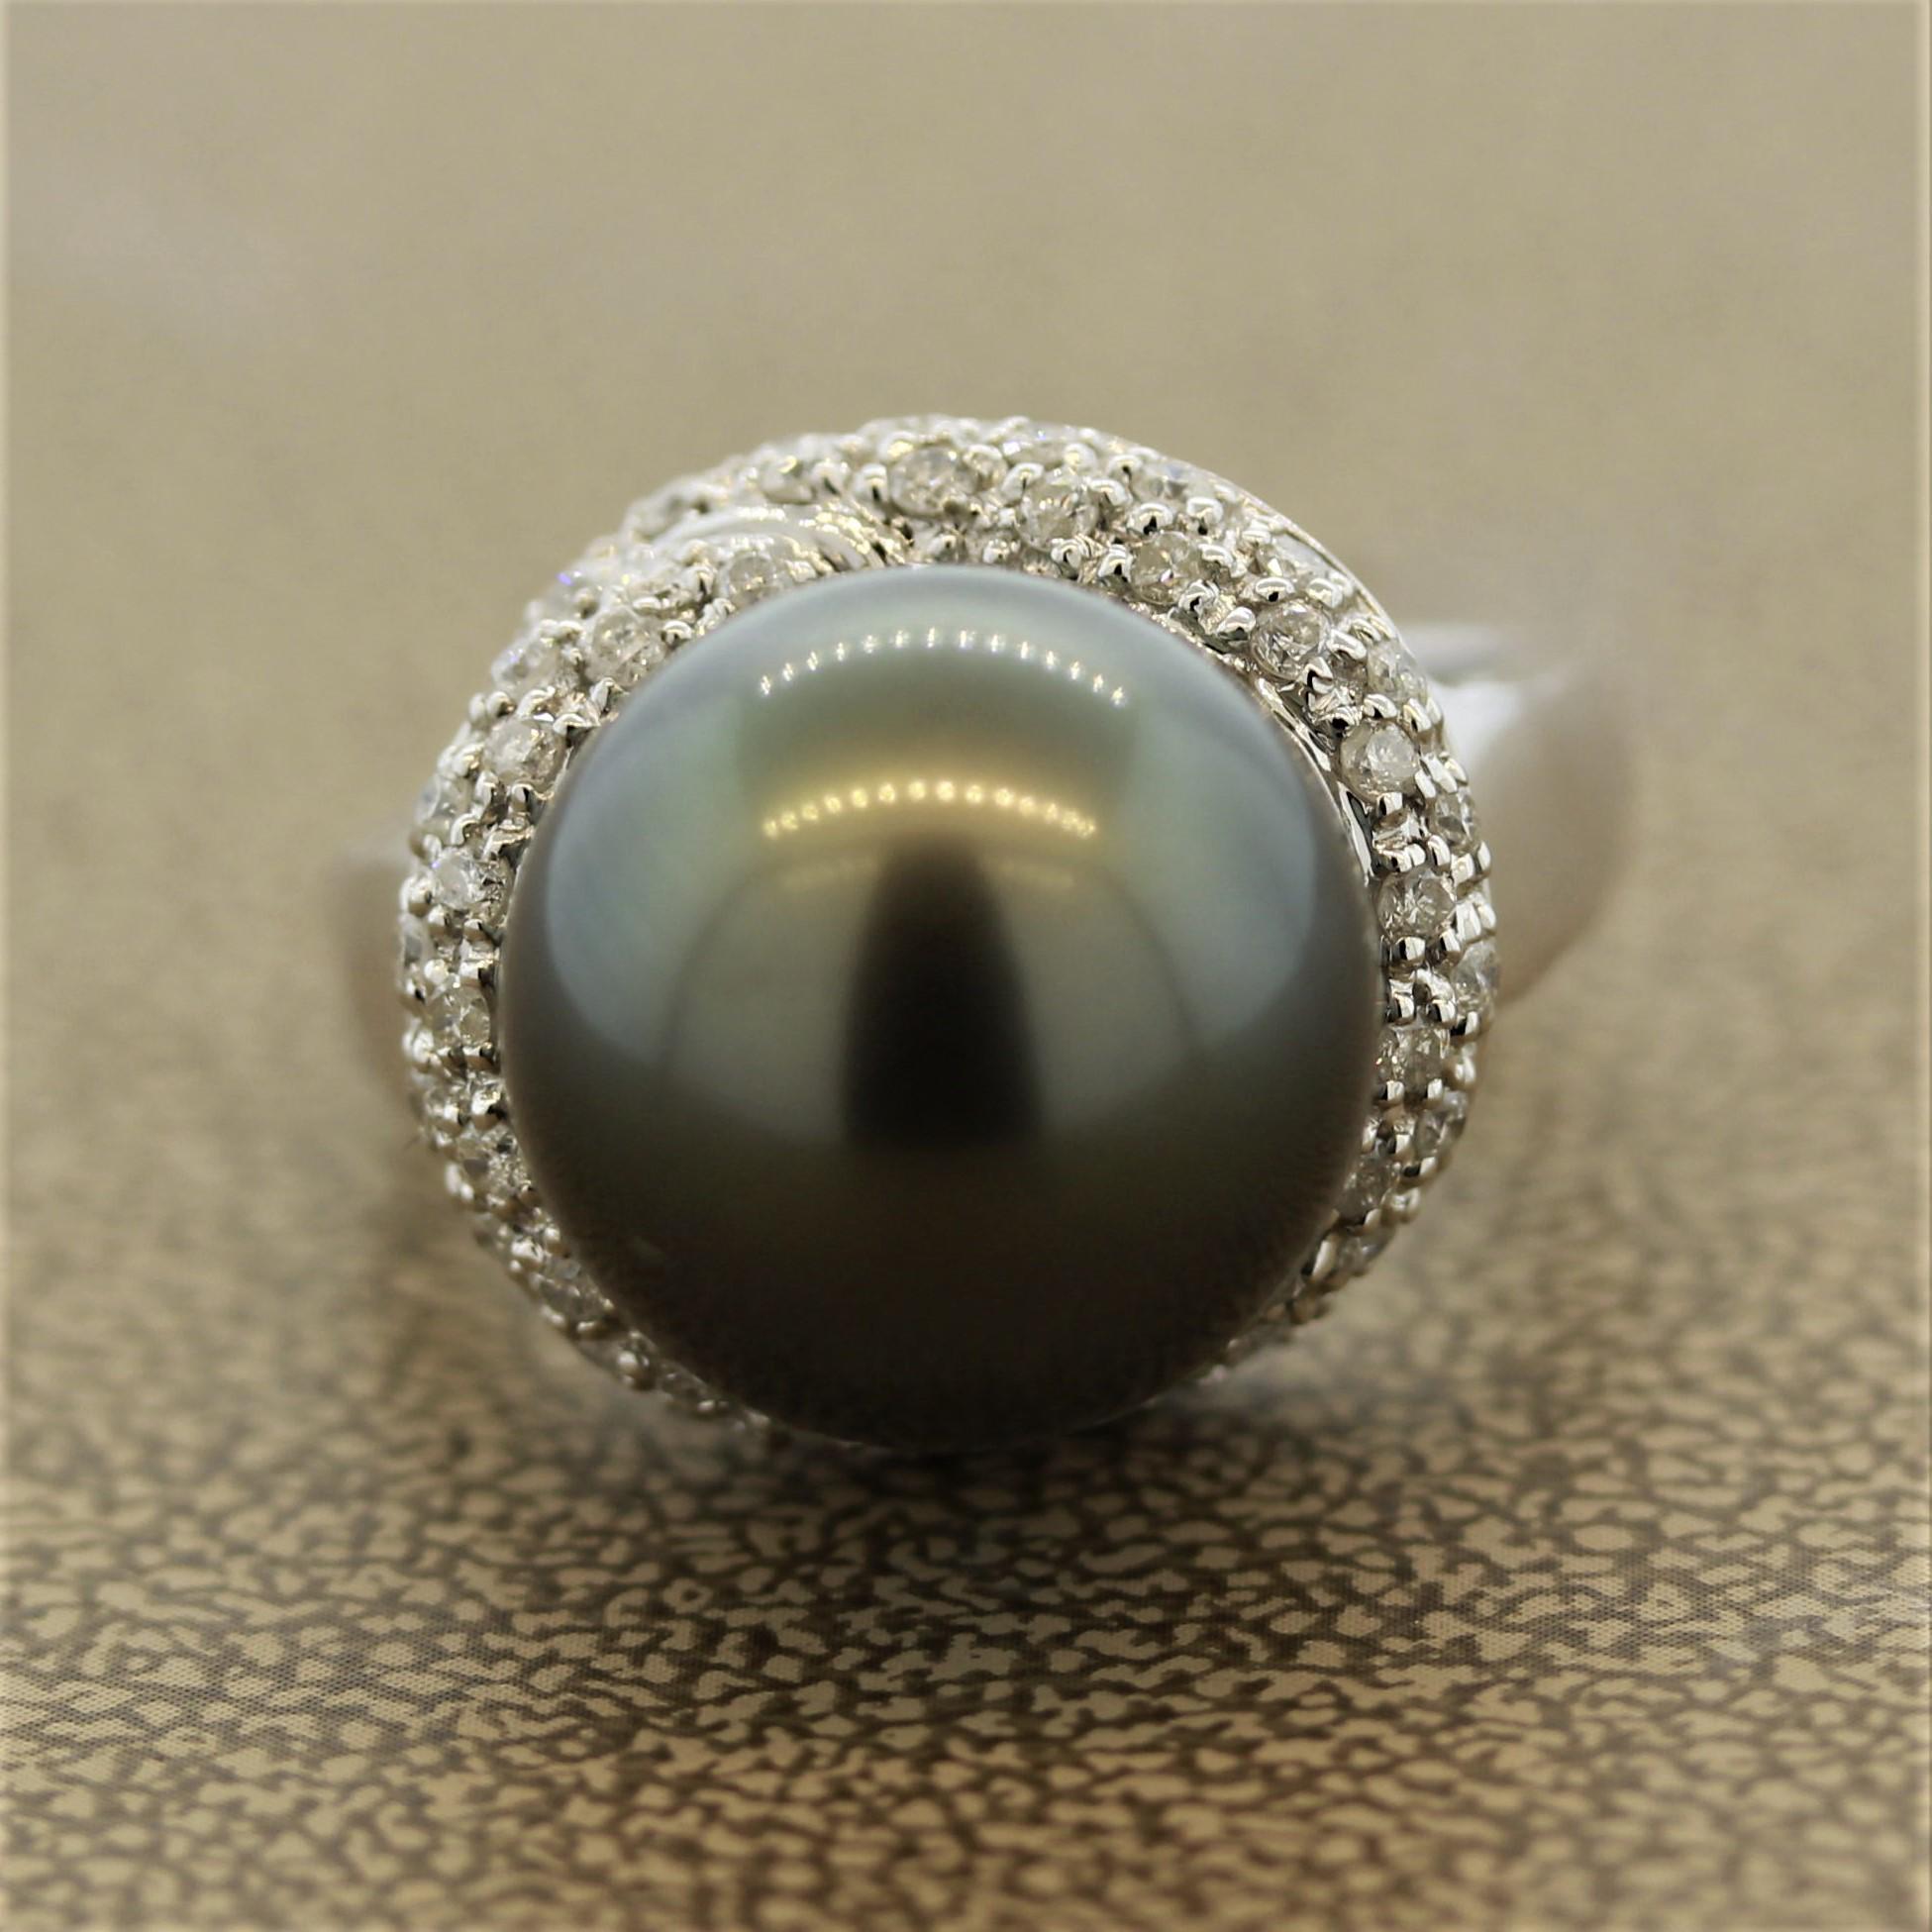 This ring features a stunning Tahitian pearl as the center stone and adding charm to it are 0.21 carats of diamonds that are set below the pearl like an overlapping ribbon.

The ring is made of 14K White Gold.

Ring Size: 7